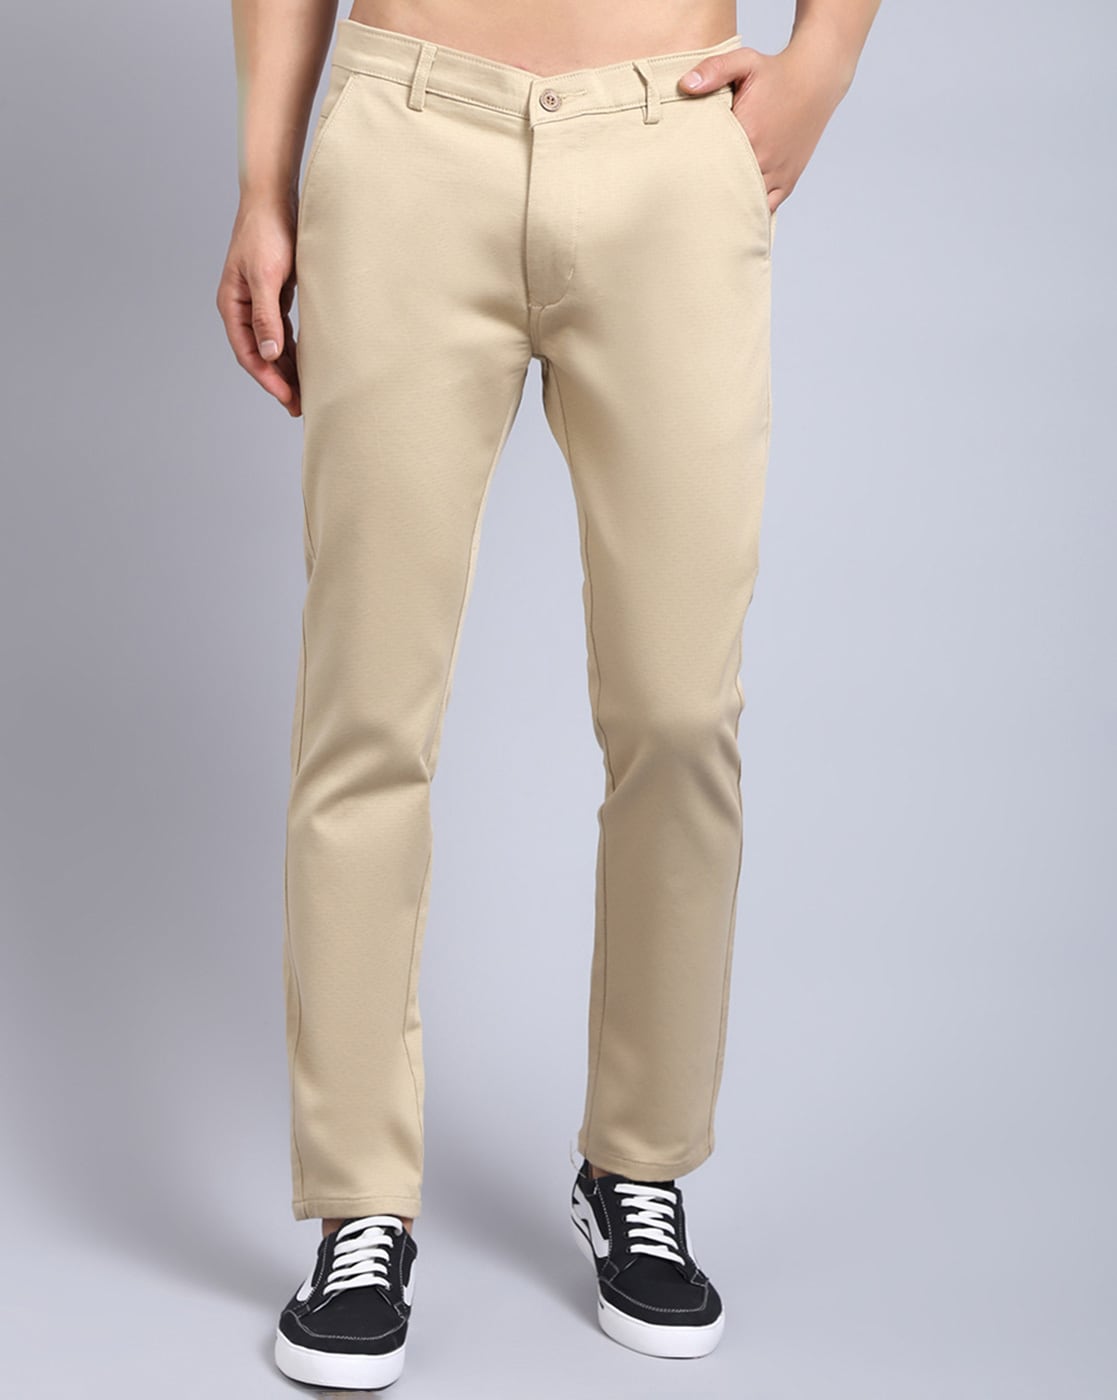 Buy Trousers  Chinos from top Brands at Best Prices Online in India  Tata  CLiQ